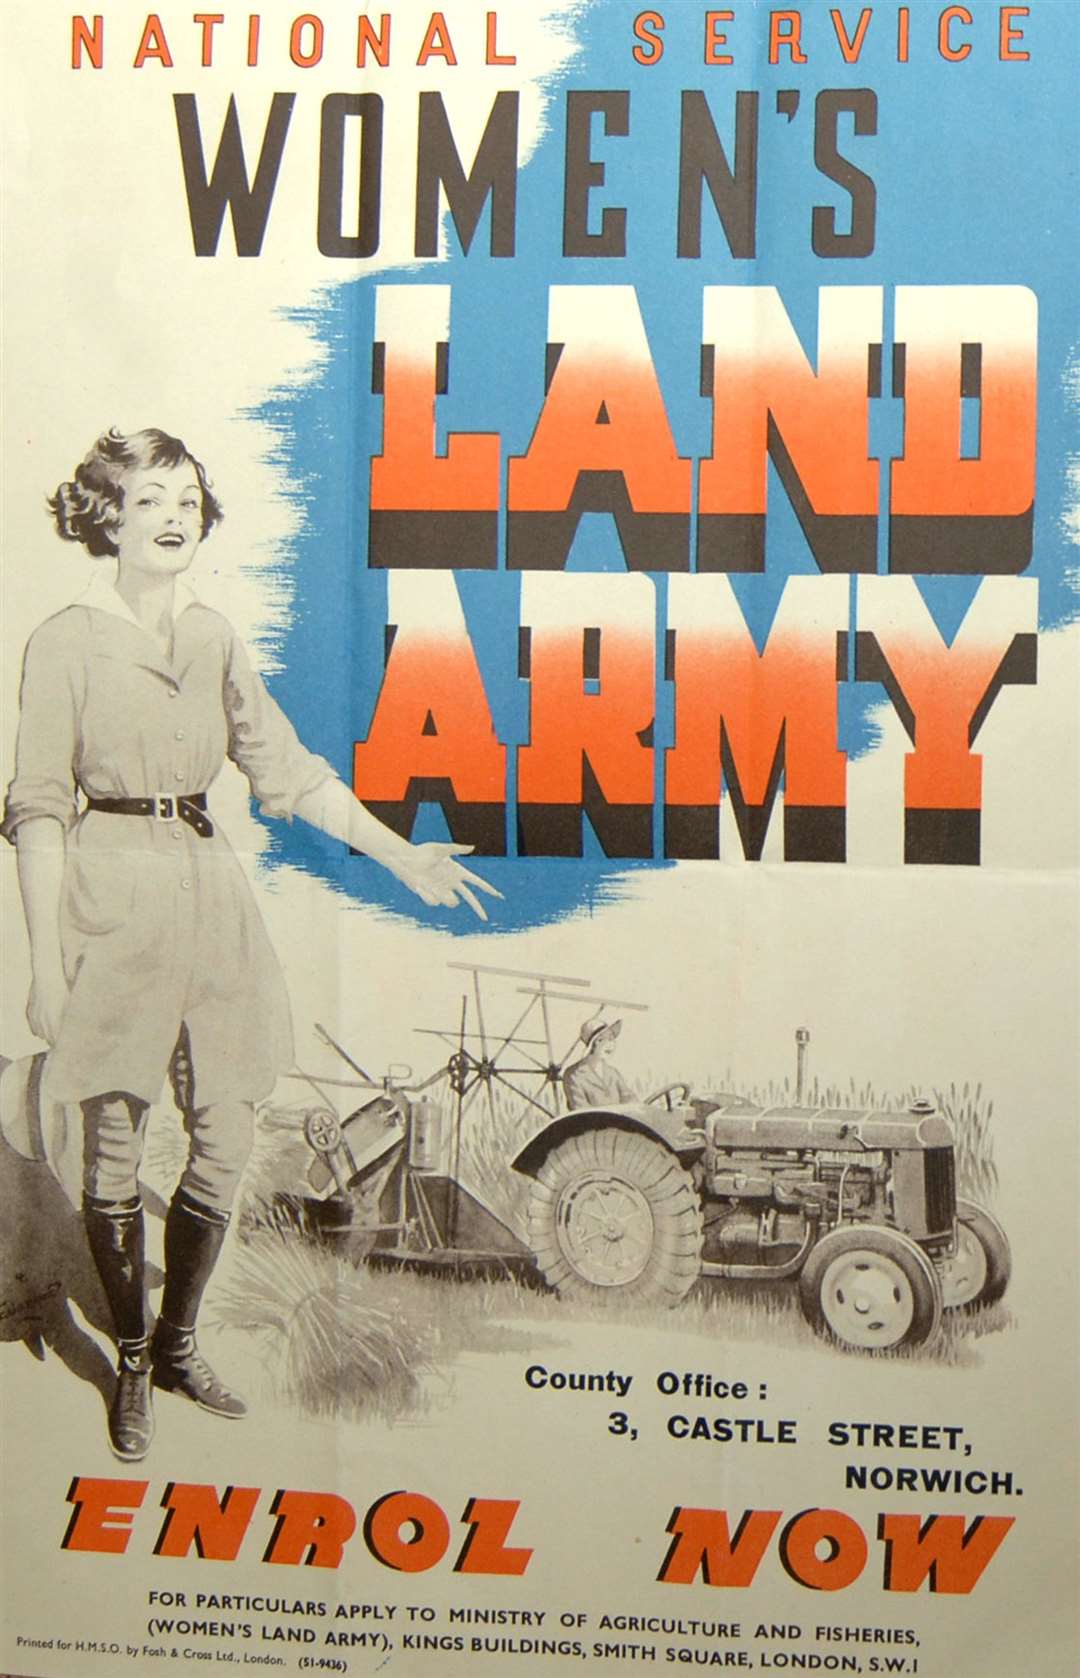 A recruitment poster for the Women's Land Army